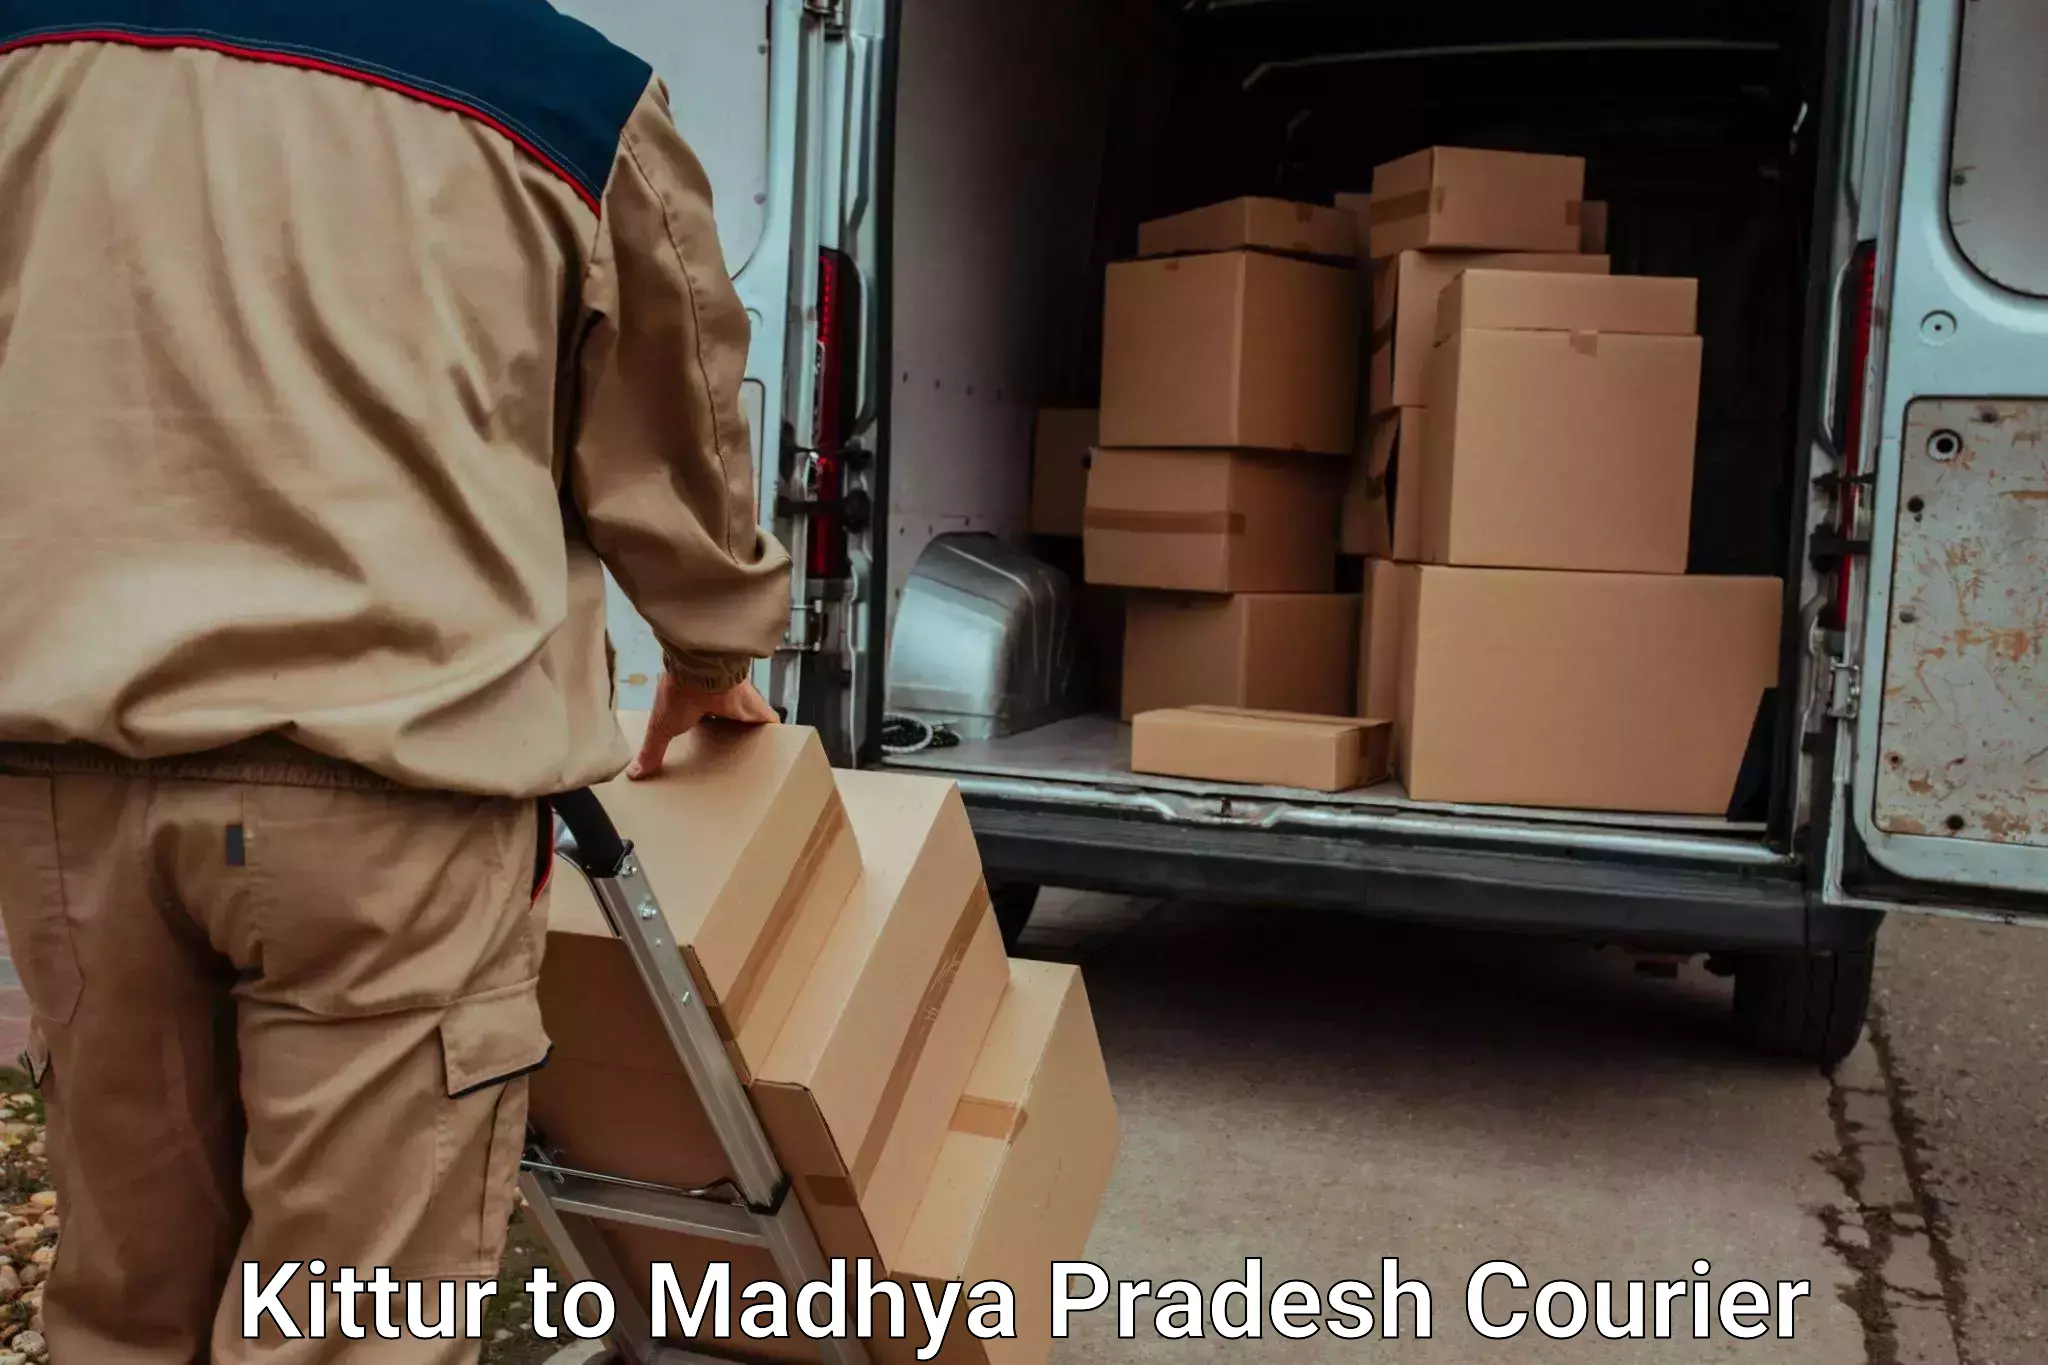 Furniture moving experts Kittur to IIIT Bhopal